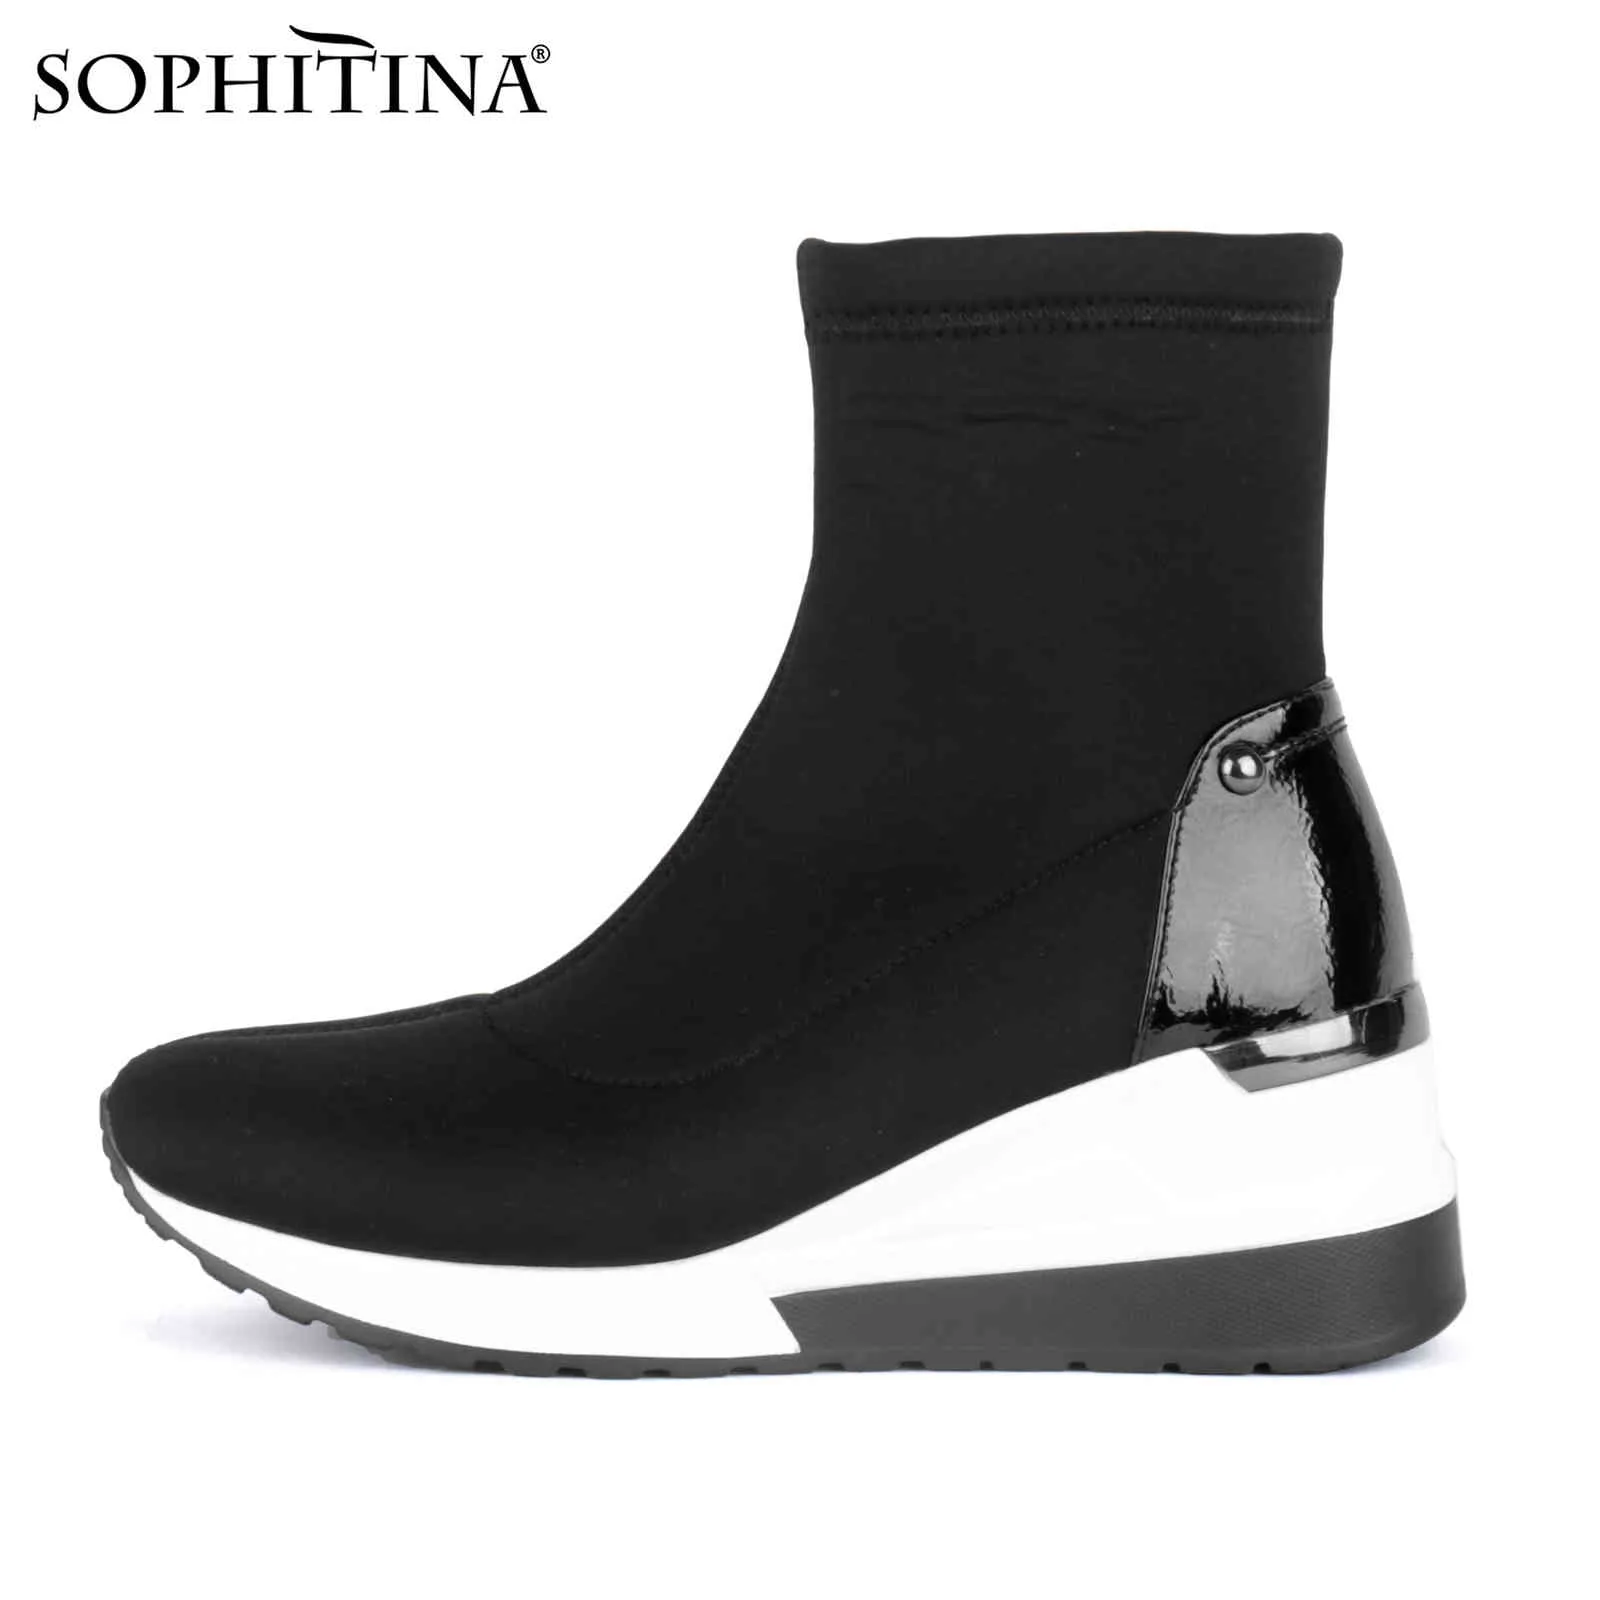 SOPHITINA Womens Stretch Ankle Boots Heeled Fashion Lightweight High Top Spring Autumn Outdoor Platform Wedge Walking Shoes Y176 210513